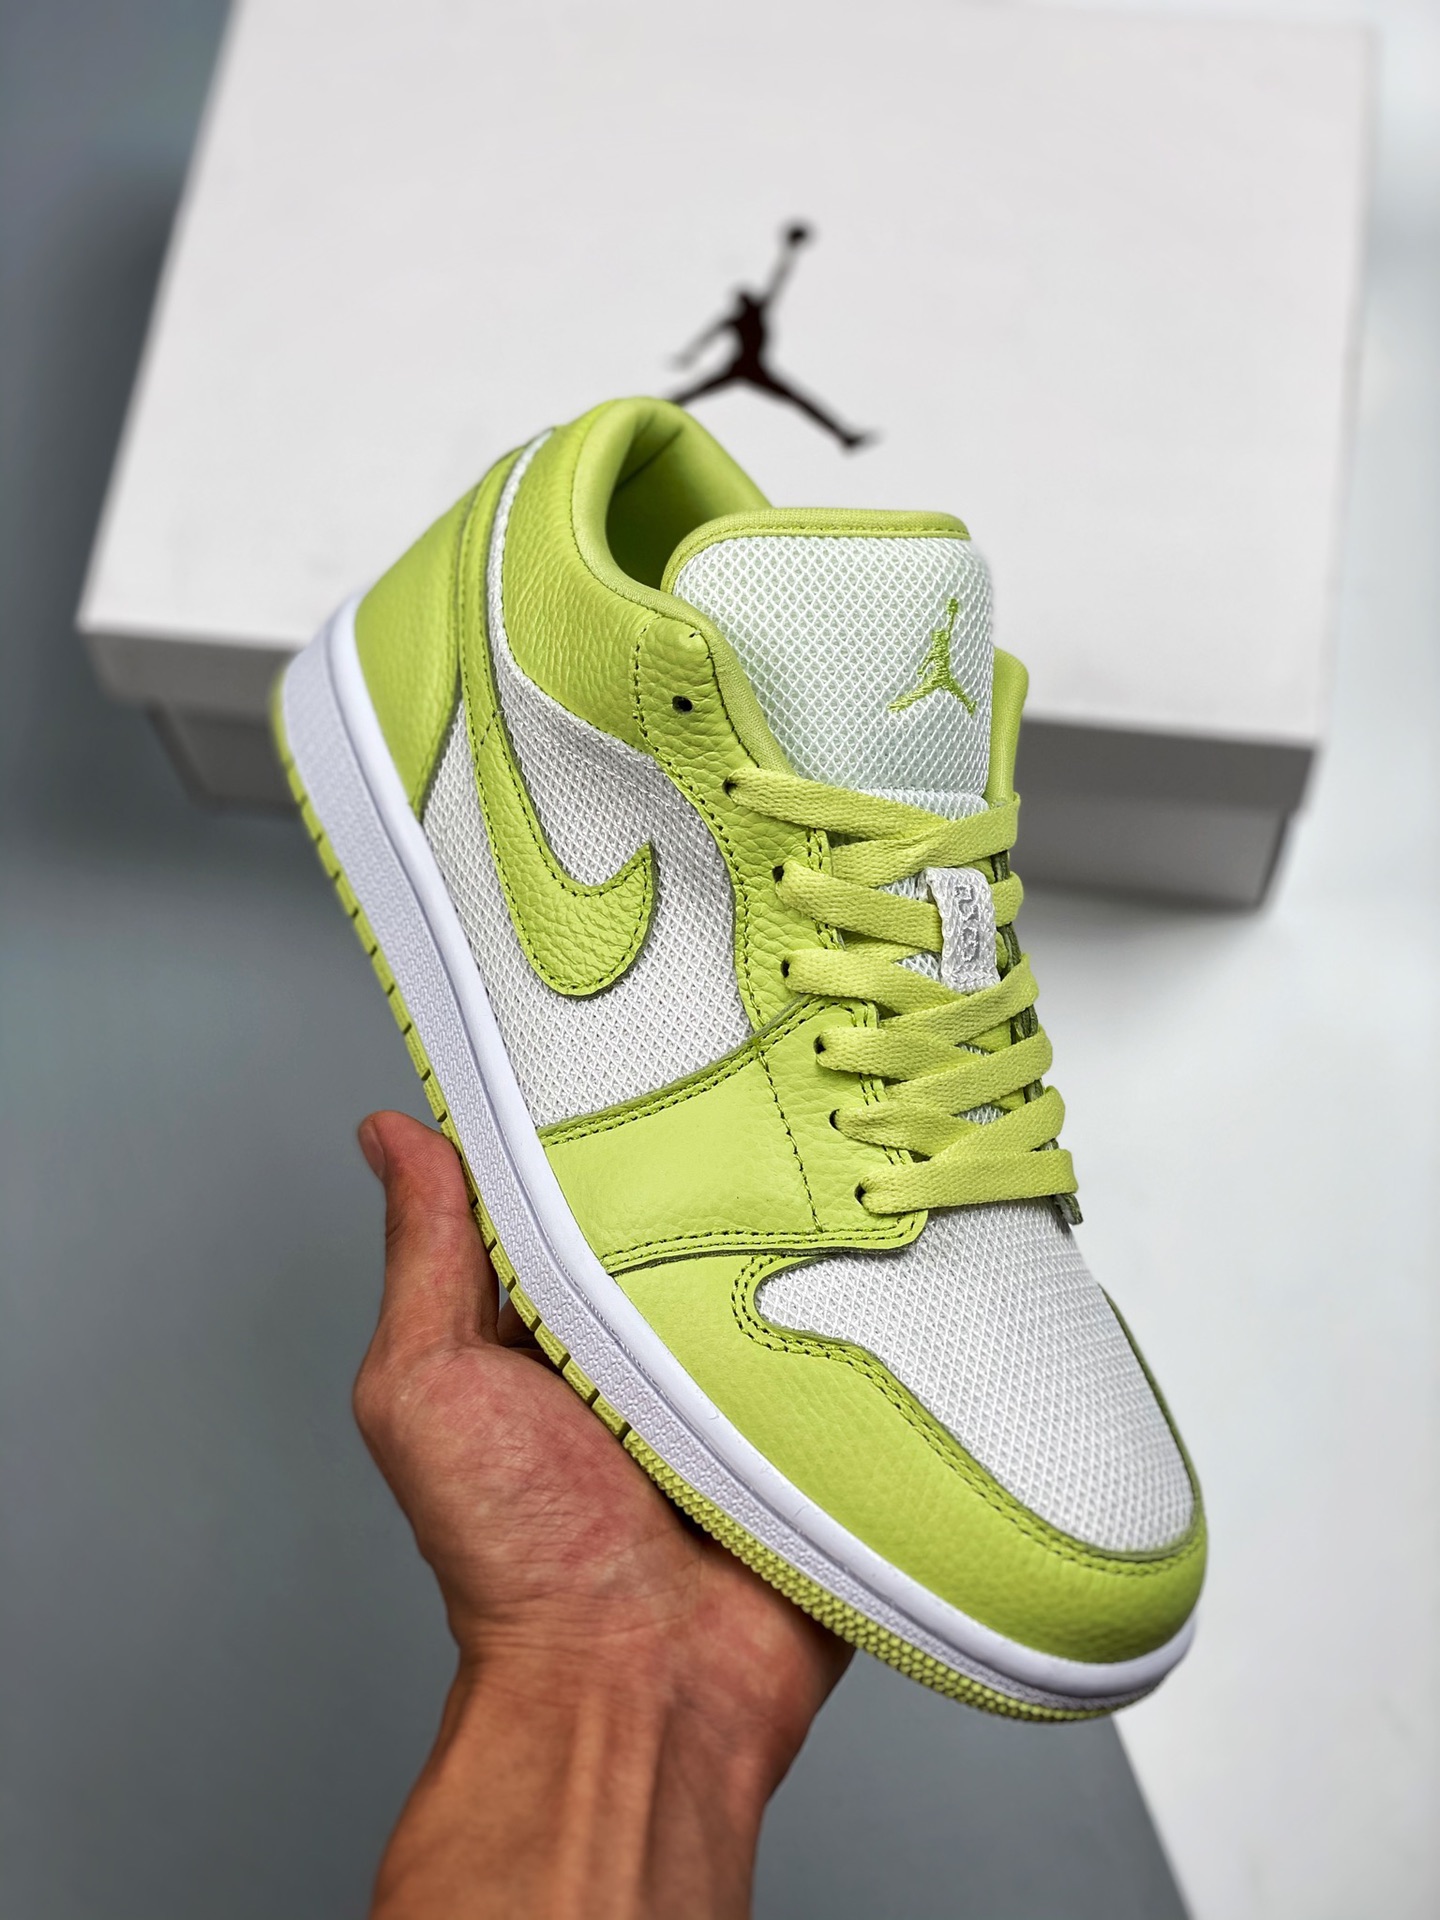 Air JD Jordan 1 Low Summit White/Limelight DH9619-103 Shoes